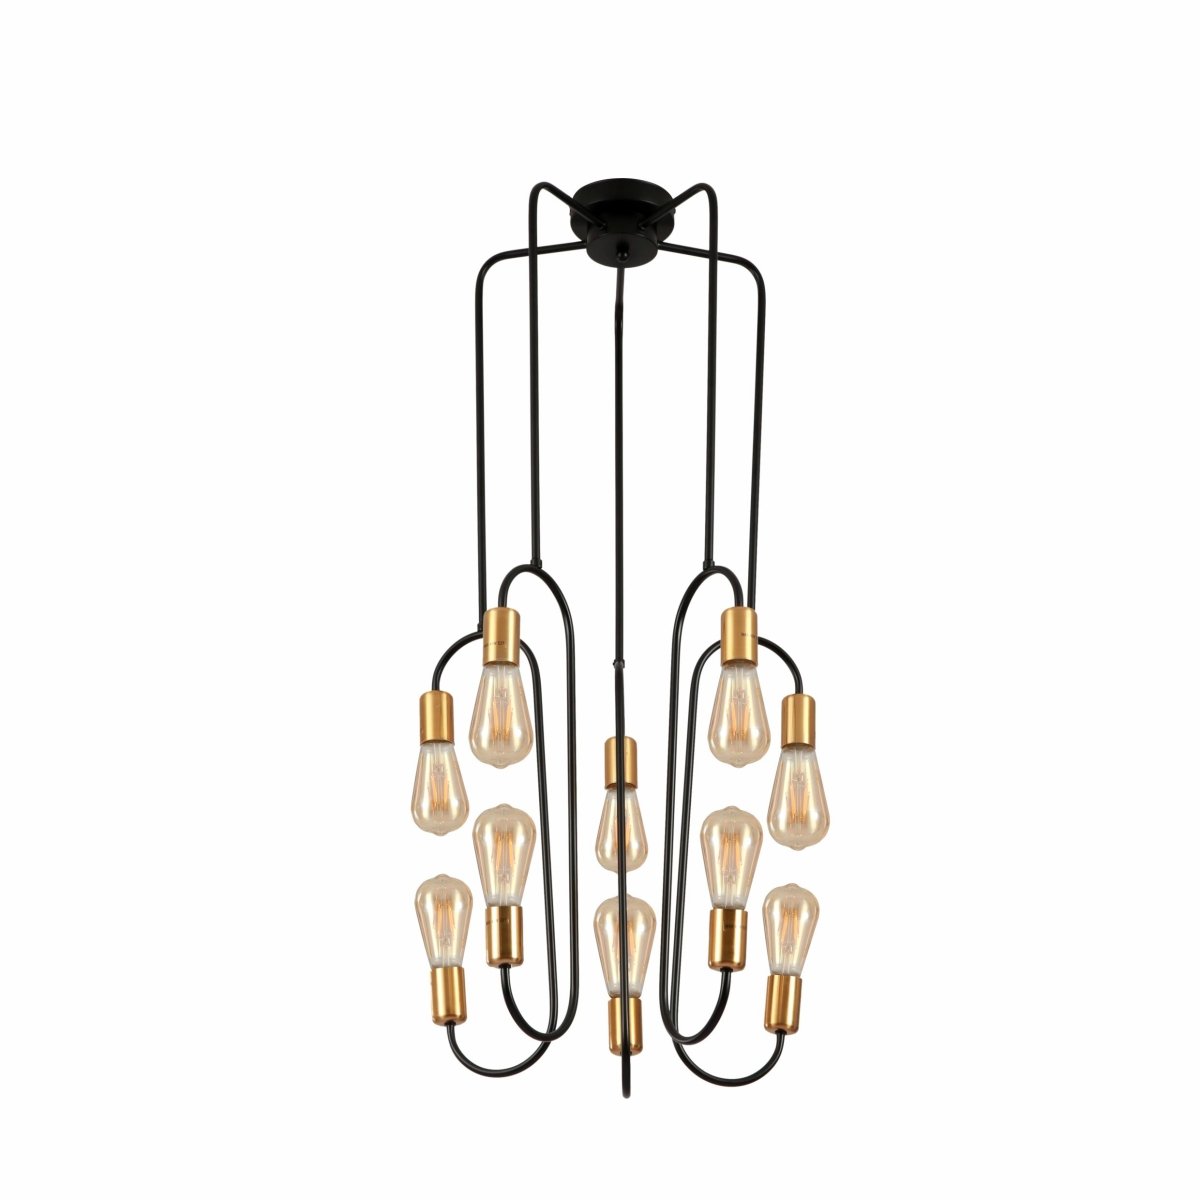 Main image of Black and Gold Modern Nordic Pendant Chandelier Light with 10xE27 Fittings | TEKLED 159-17482